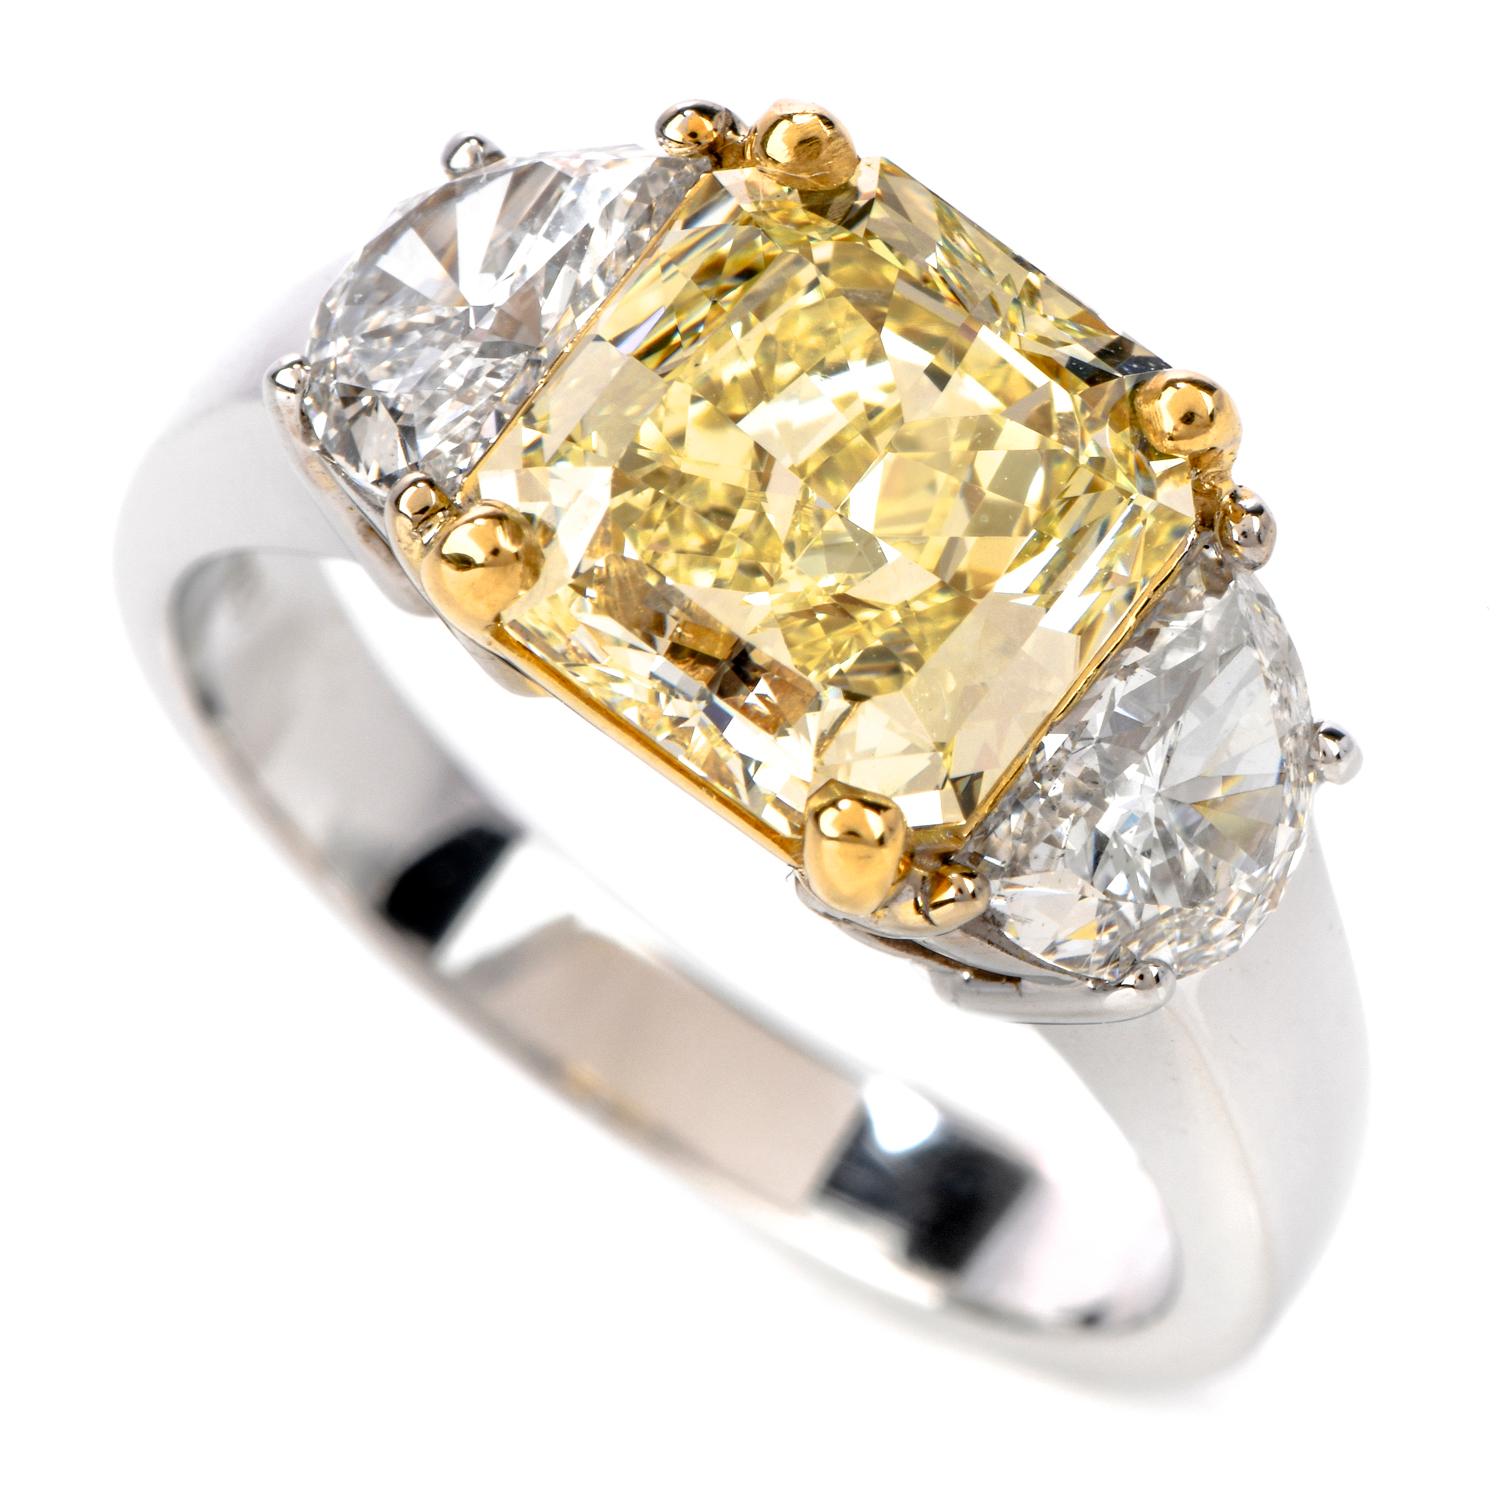 Show your sweetheart that they are the sunshine in your life with this spectacular GIA Fancy Light Yellow Diamond 18K Gold Three Stone Ring!  

The center stone is of modified brilliant radiant cut, prong set,fancy light yellow, VS1 clarity, 2.08